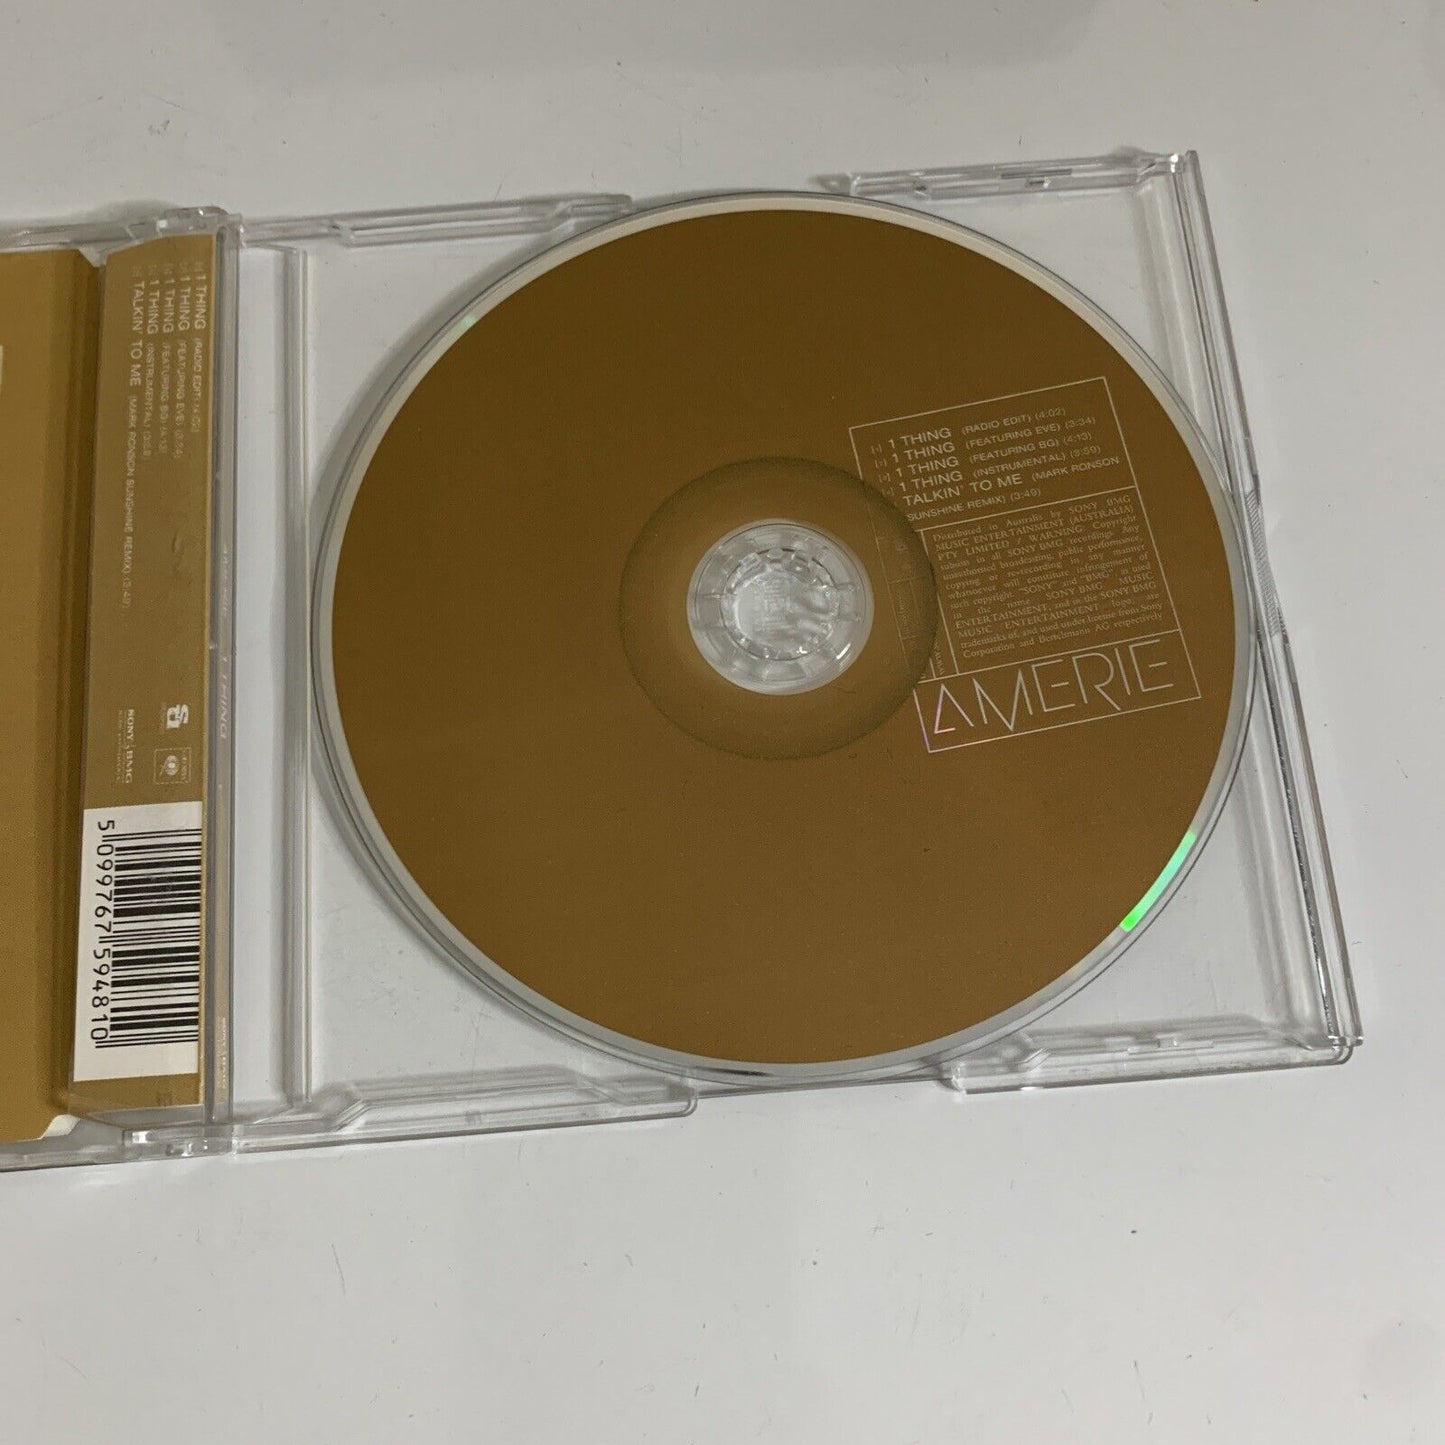 1 Thing by Eve Amerie (CD, Single, 2005)